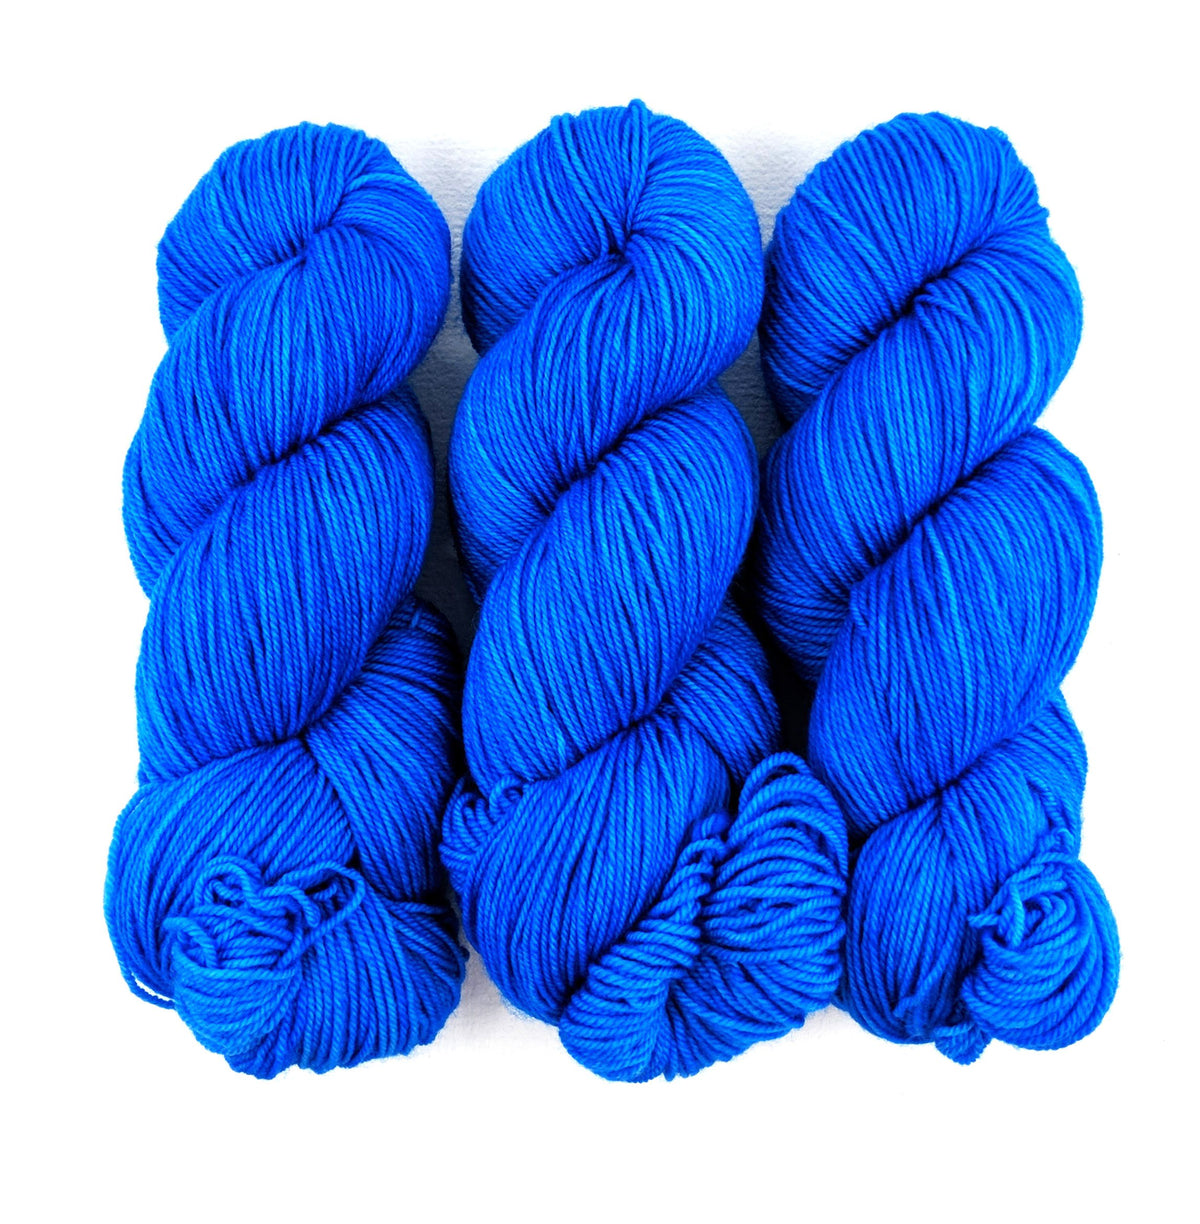 Cerulean - Passion 8 Fingering - Dyed Stock